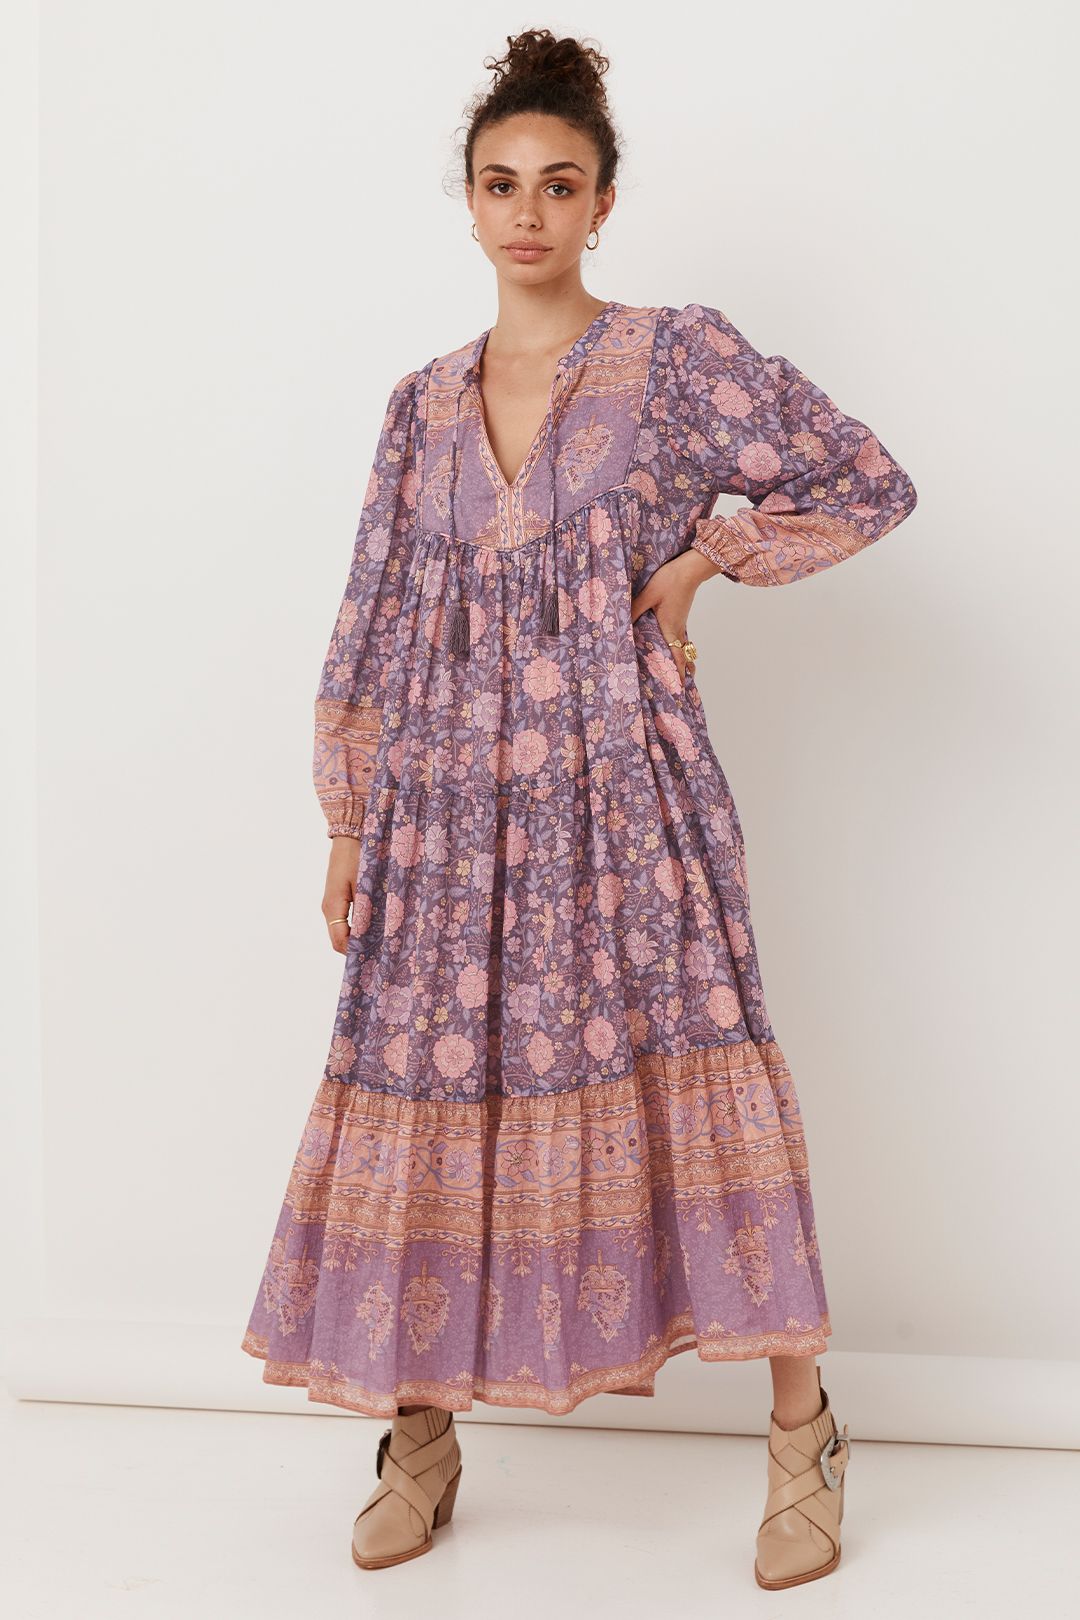 Spell Love Story Gown Royal Lilac Paisley